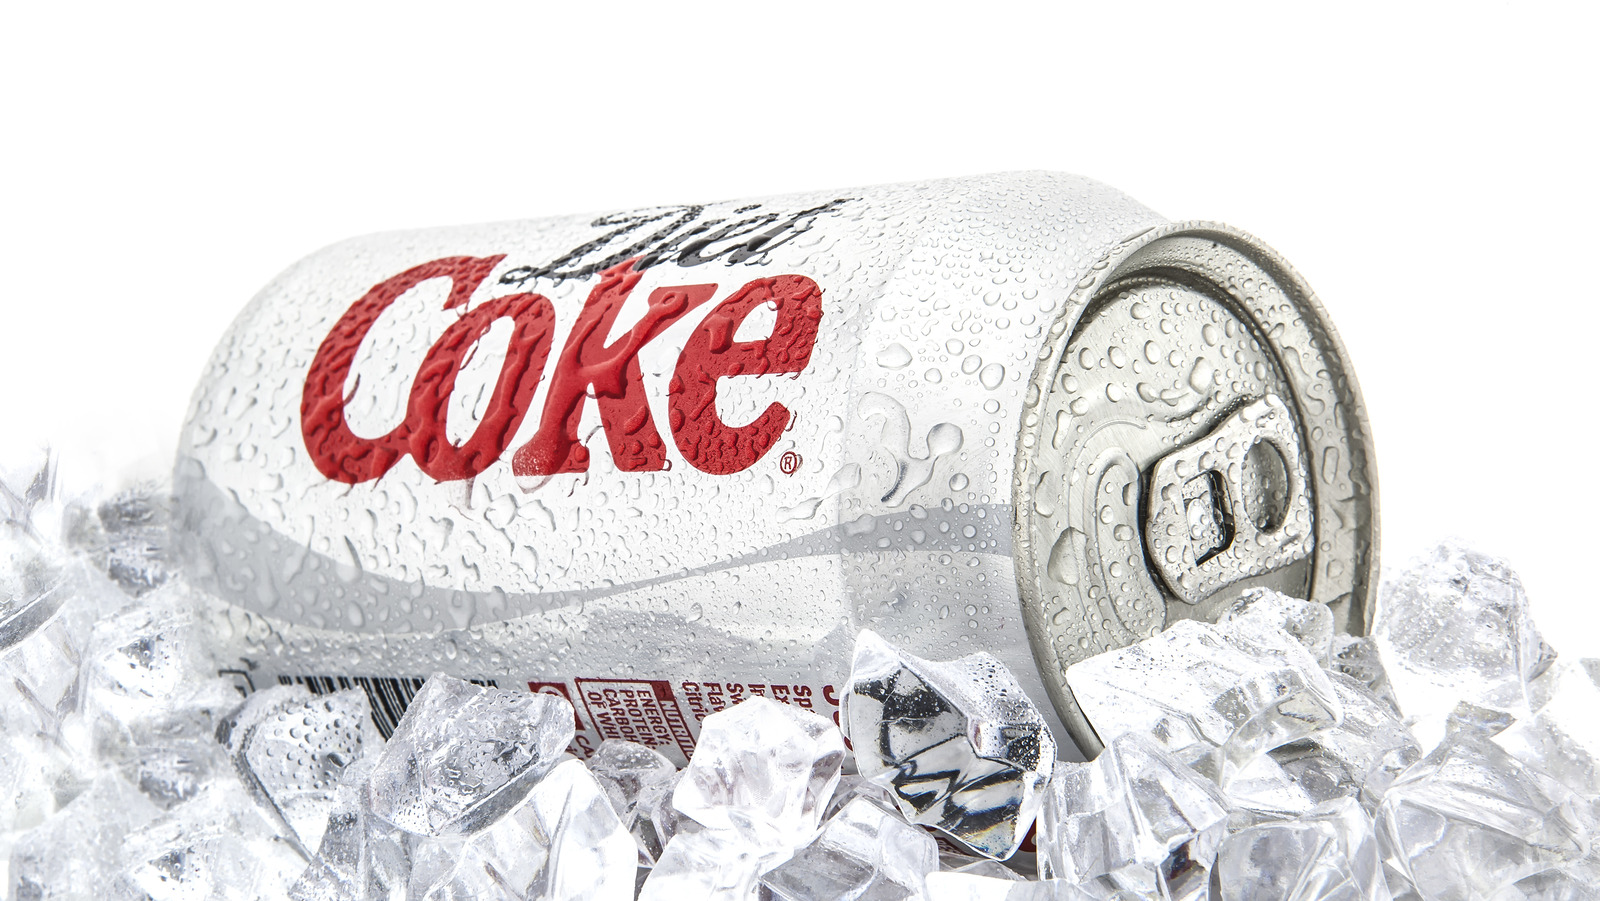 https://www.healthdigest.com/img/gallery/what-happens-to-your-body-when-you-drink-diet-coke-every-day/l-intro-1638280287.jpg